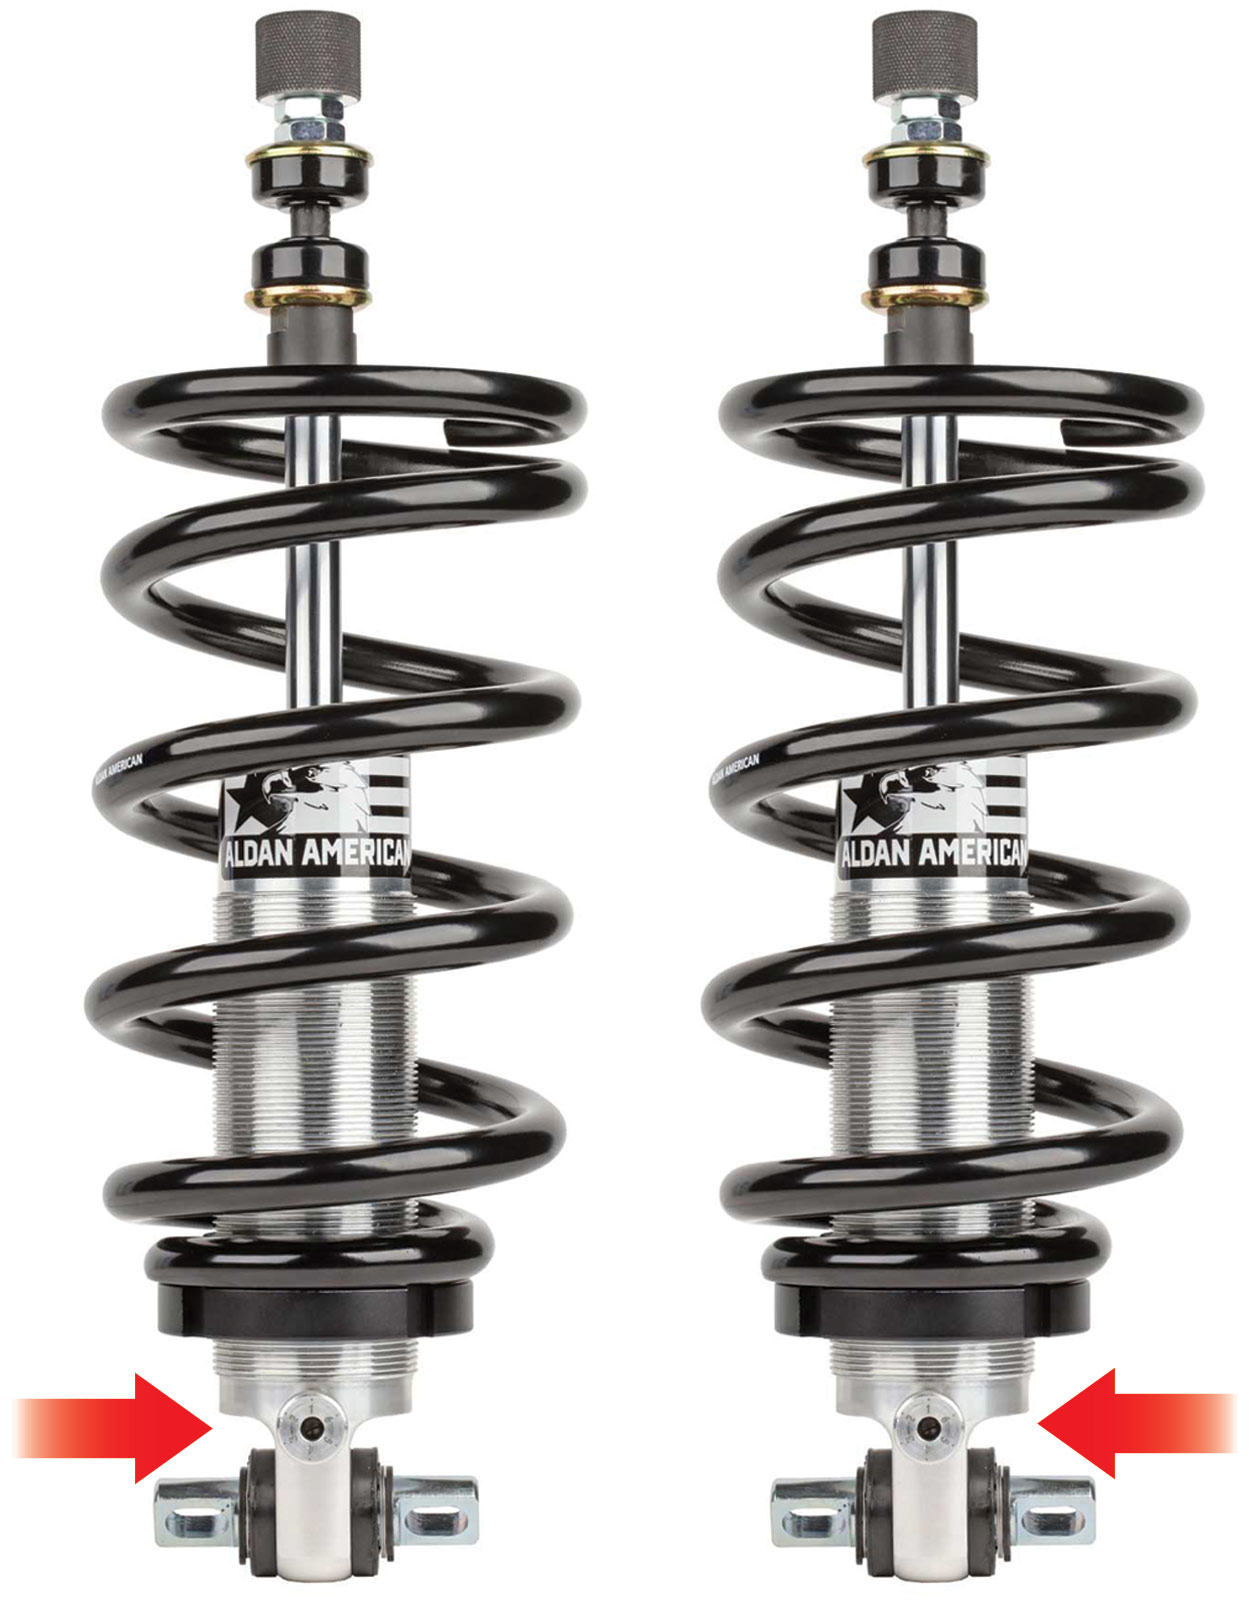 full view of two Aldan American double-adjustable RCX shocks with two red arrows pointing to a knob at one end of each